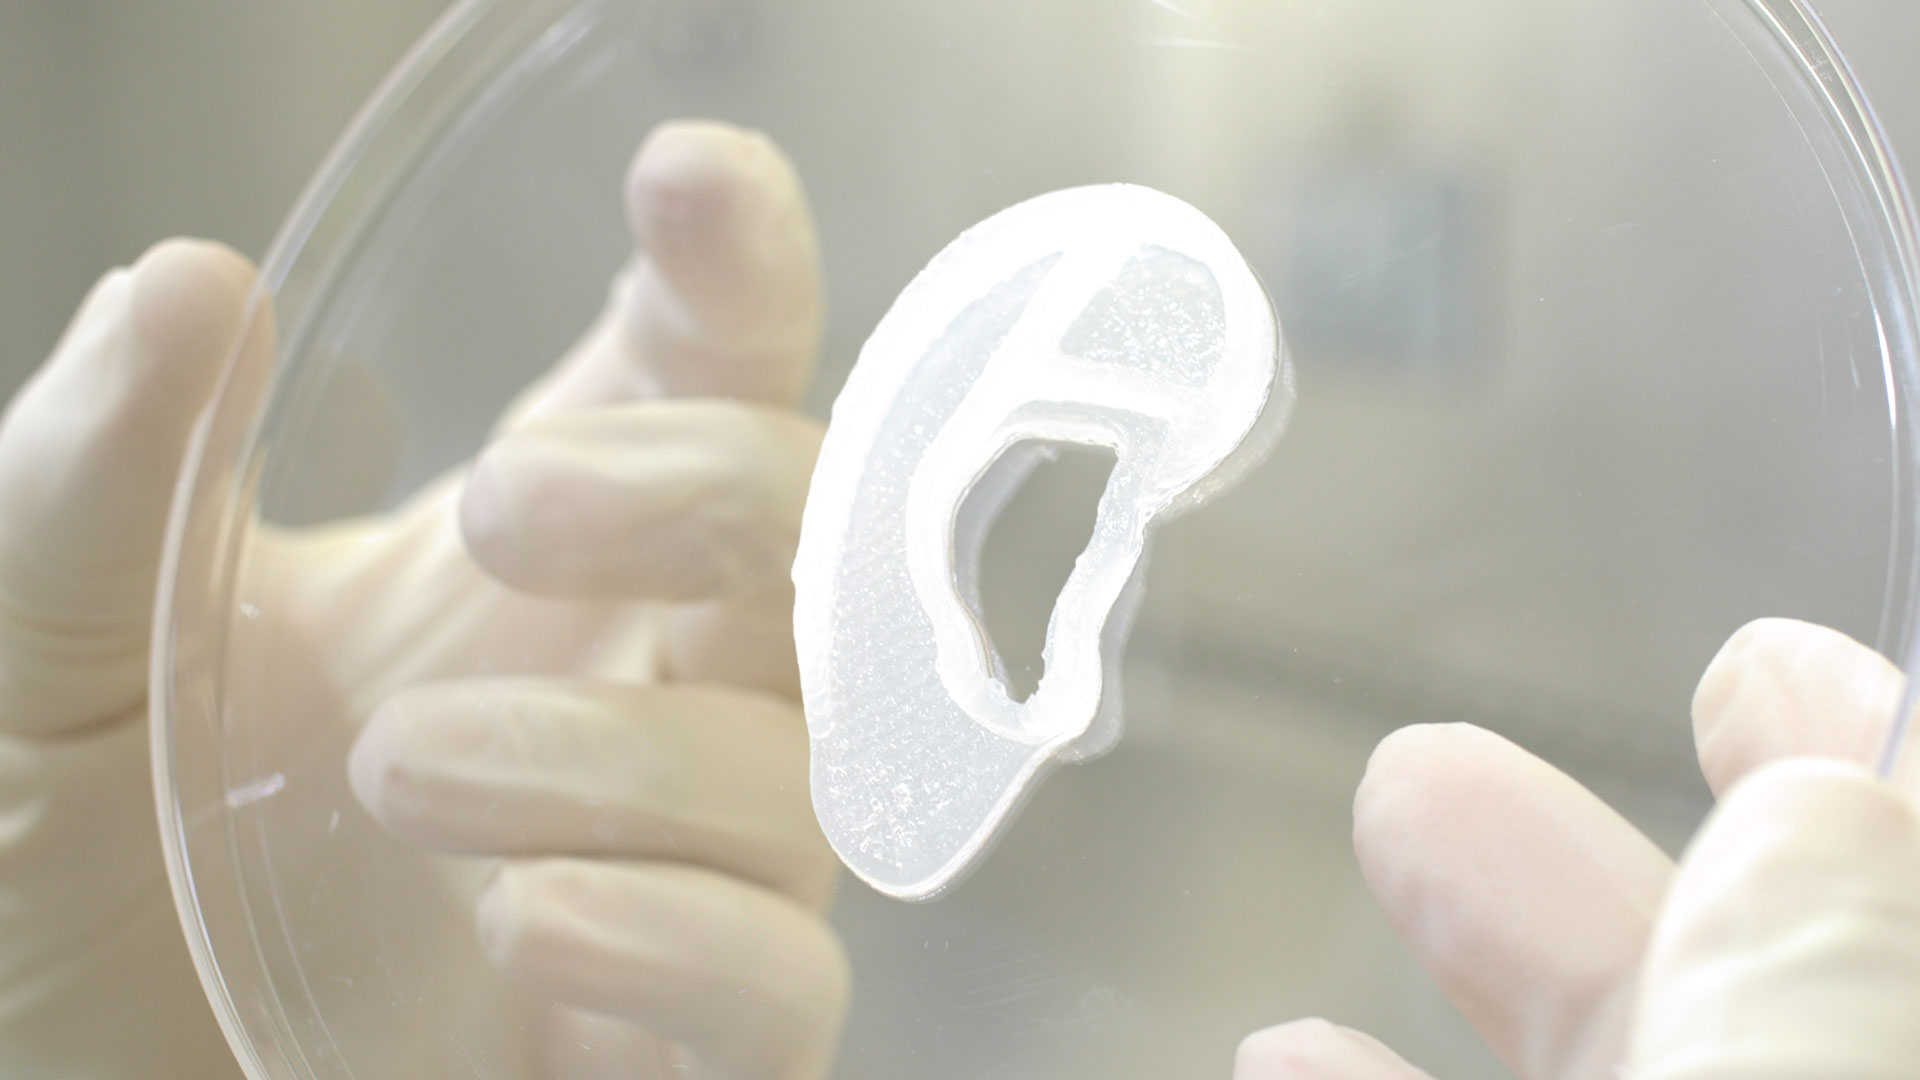 Human Ear Reconstruction Using 3D-Bioprinted Living Tissue Implant in a First-in-Human Clinical Trial